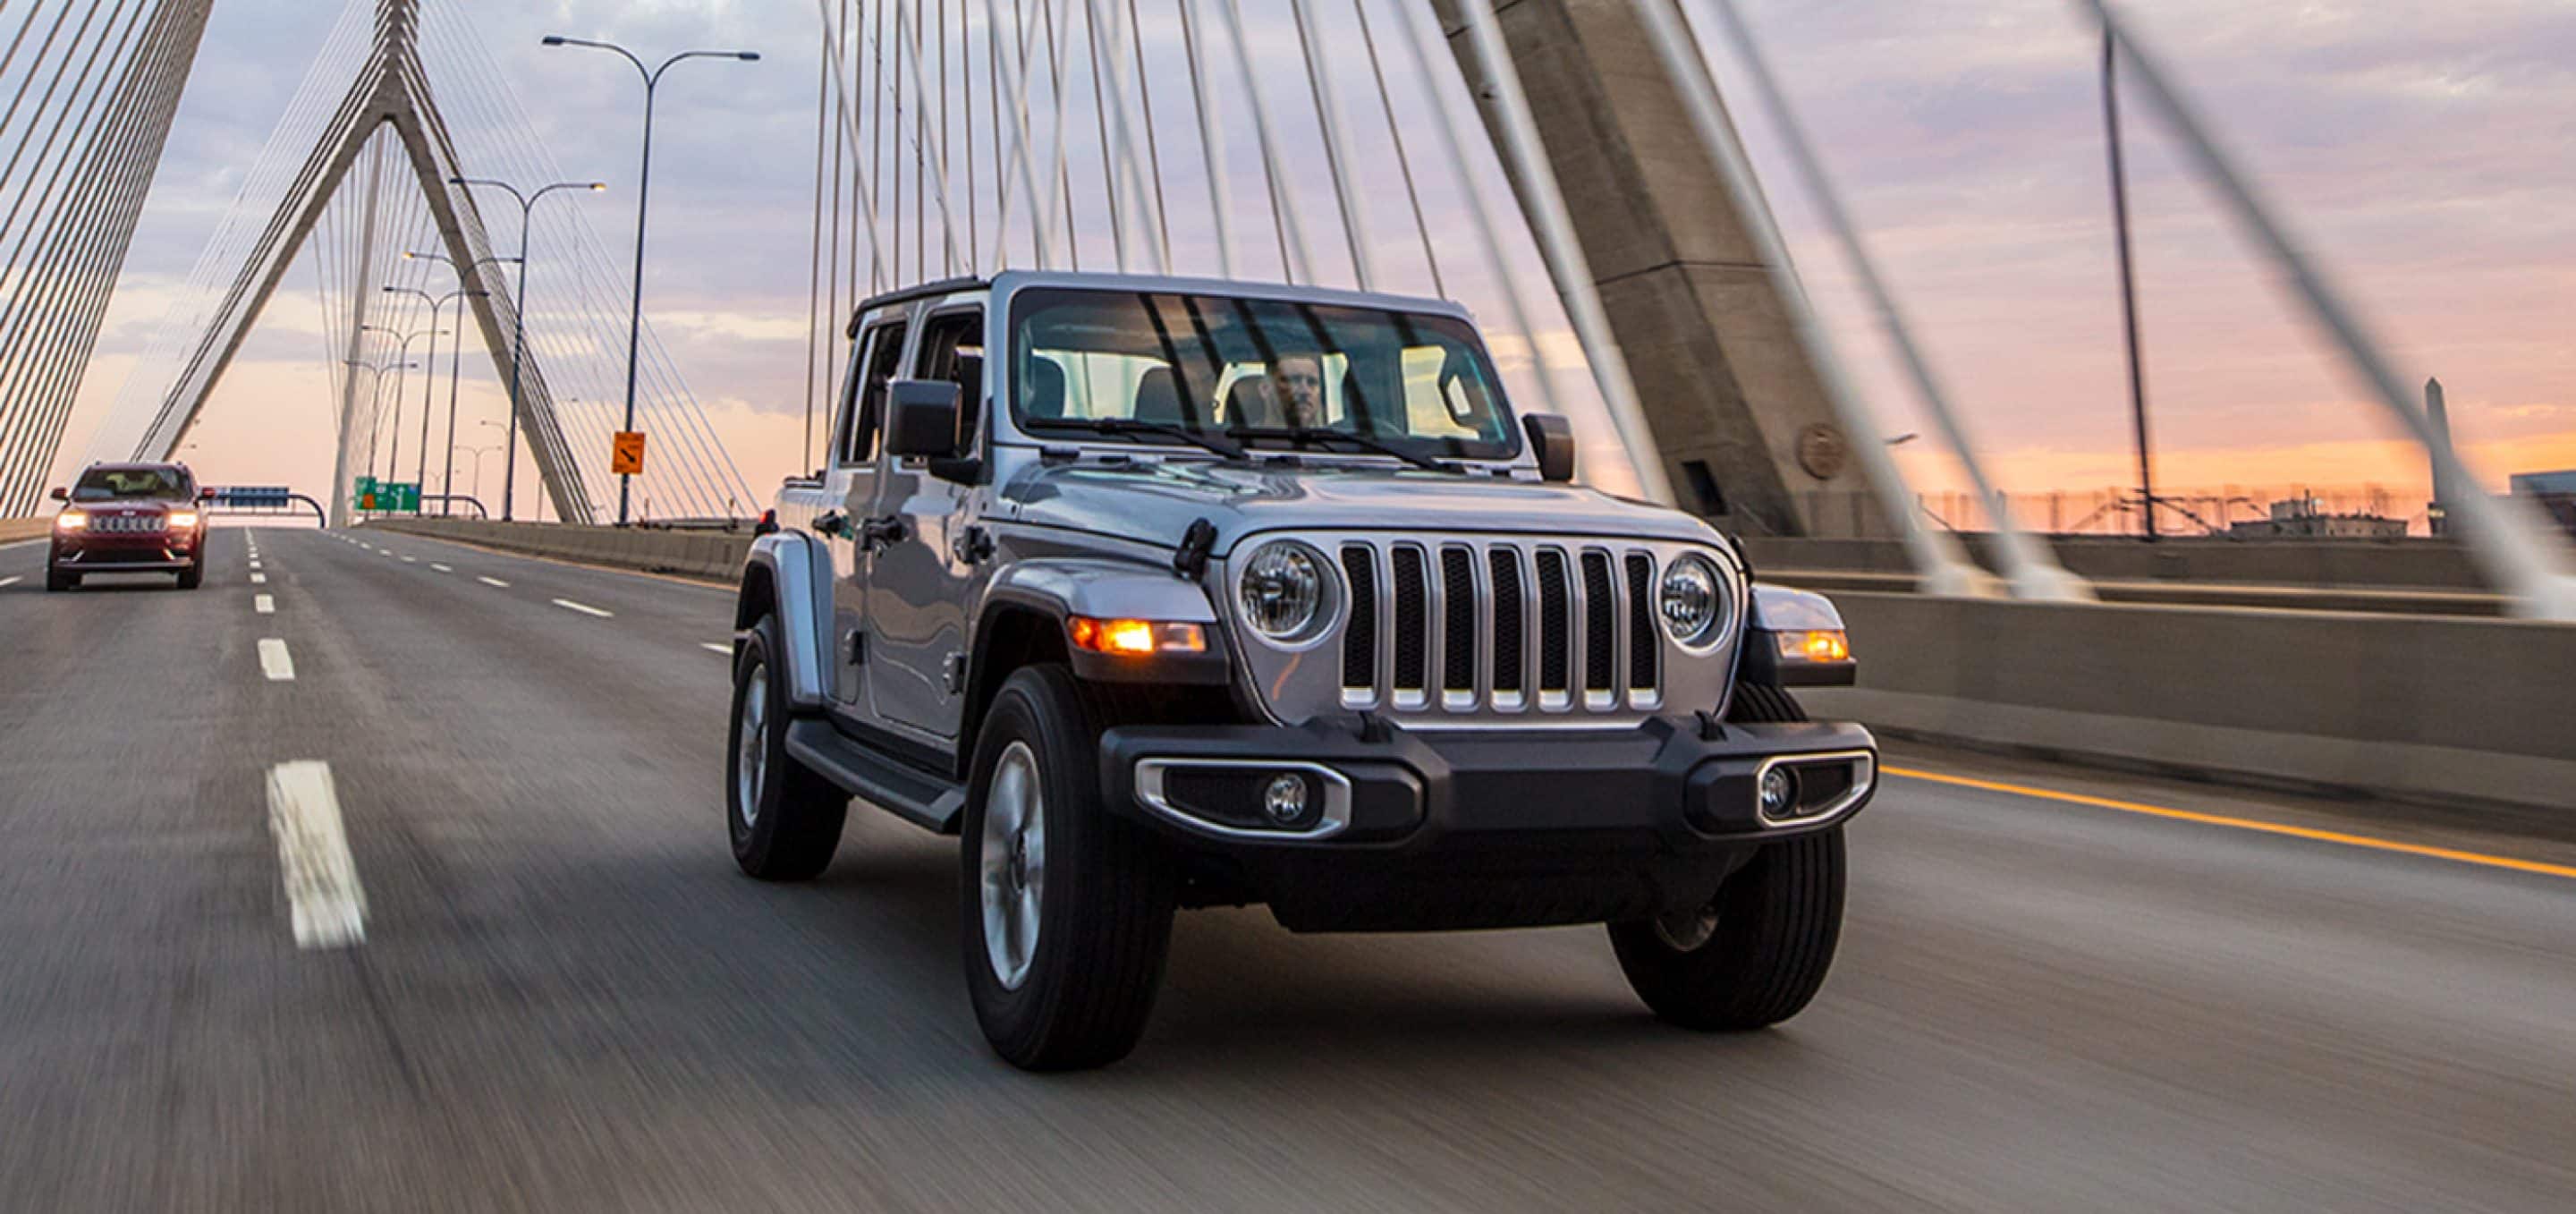 Trim Levels of the 2021 Jeep Wrangler